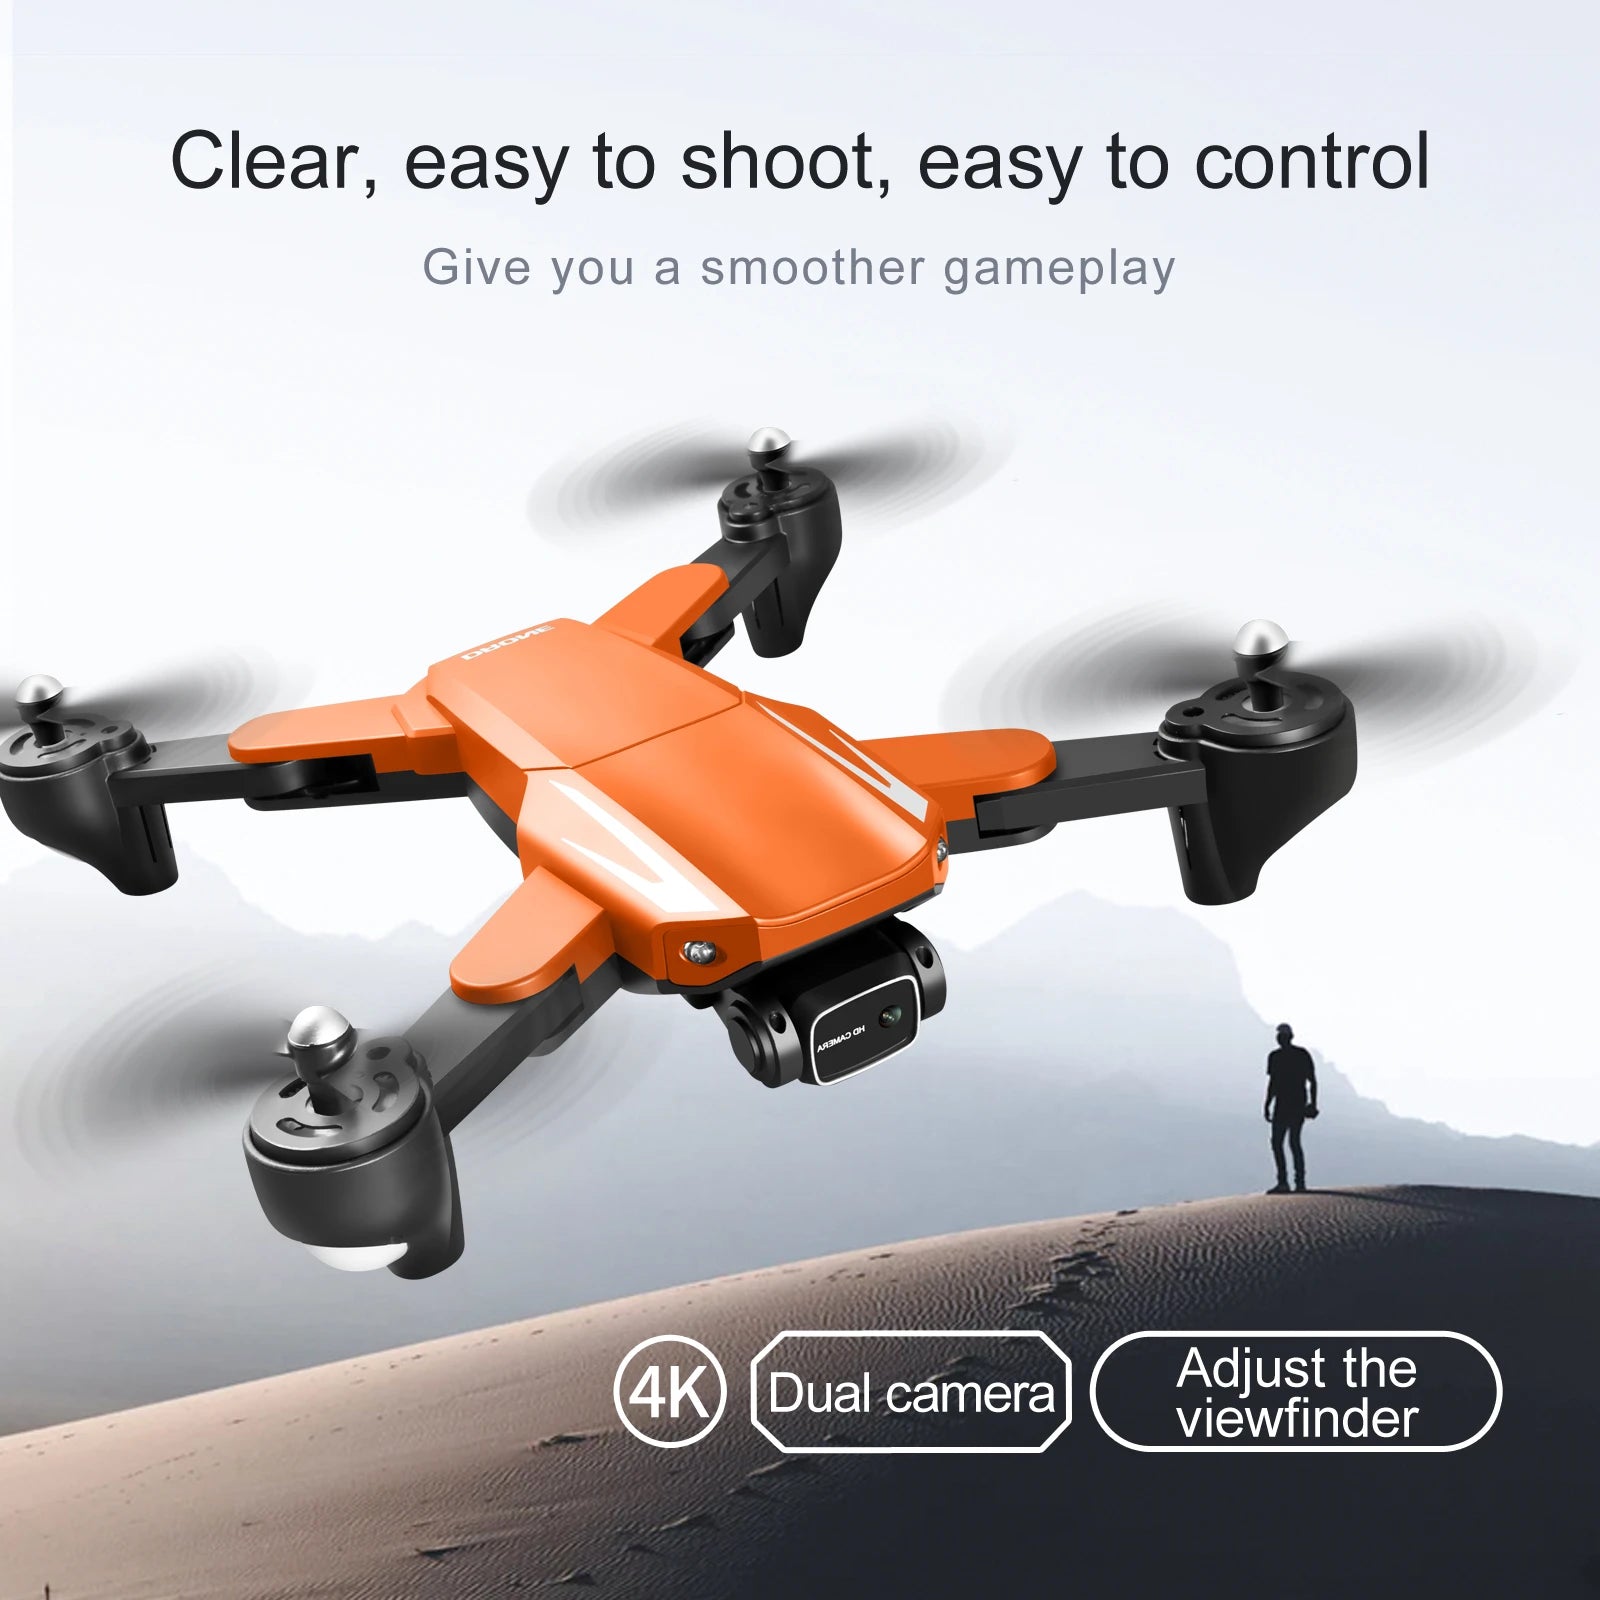 S93 Drone, clear easy to shoot give you a smoother gameplay 4k dual